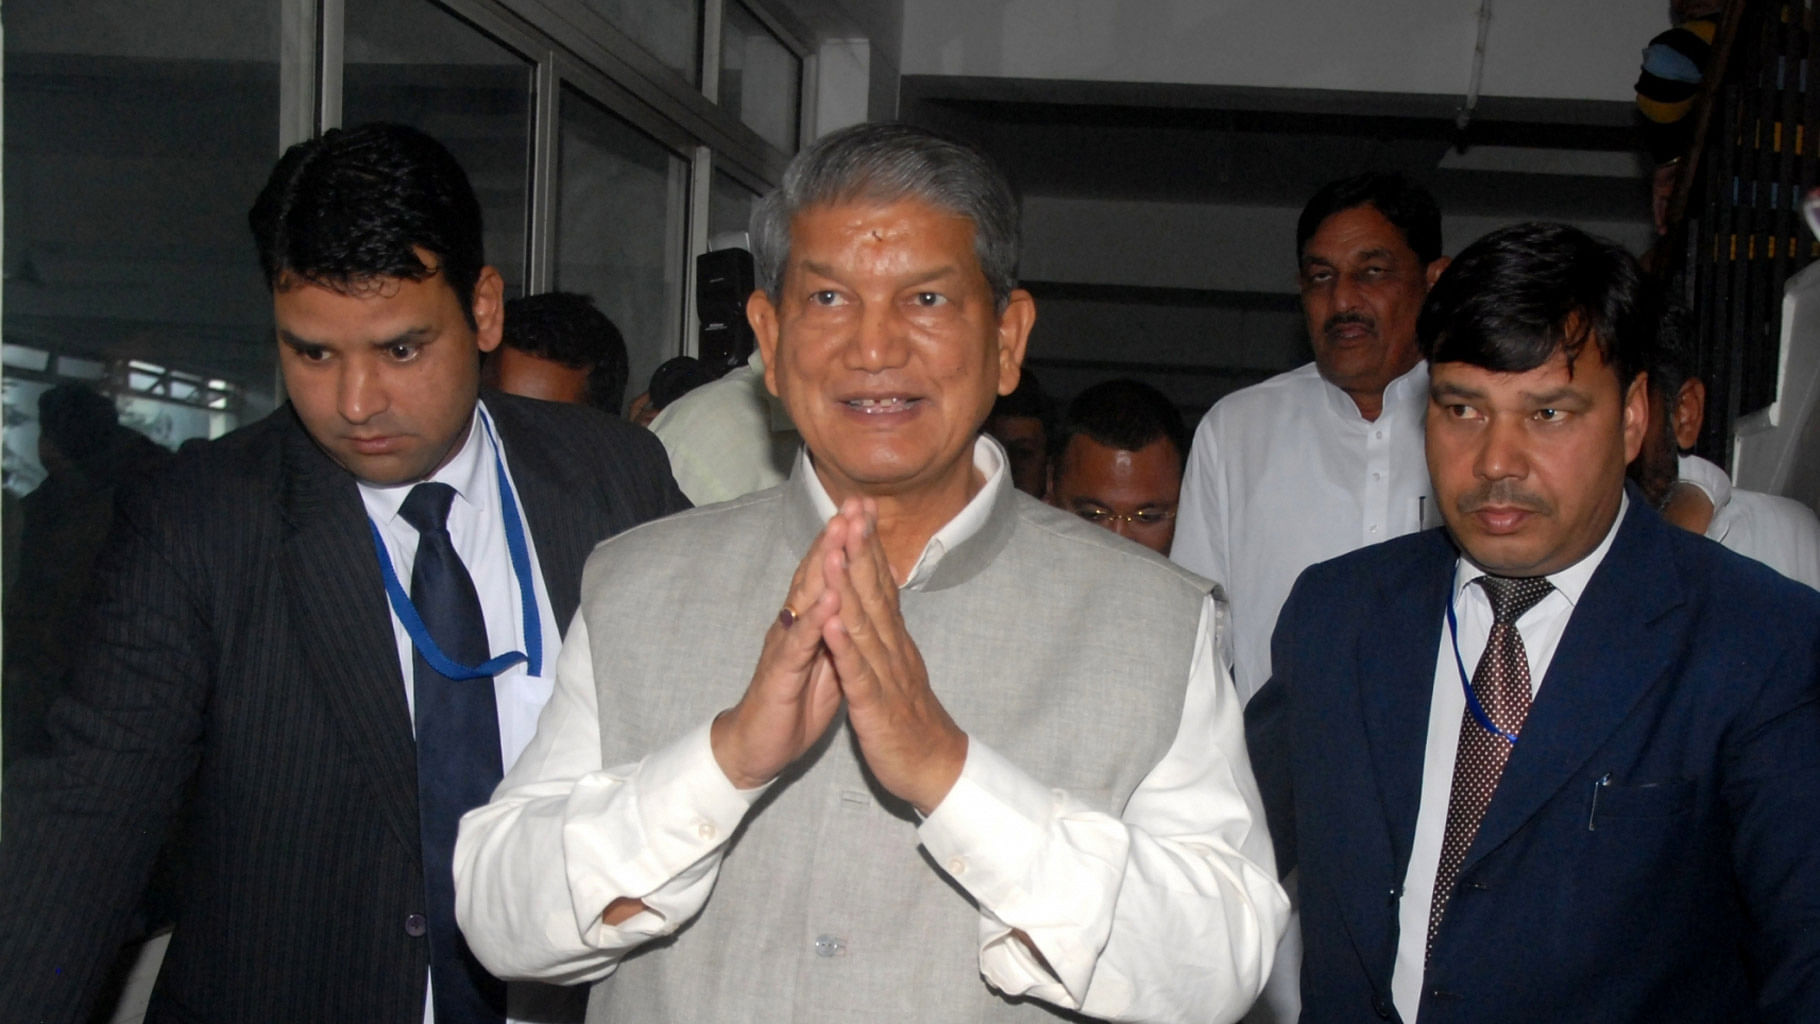 Harish Rawat was restored as Chief Minister of Uttarakhand 46 days after he was ousted. (Photo: IANS)